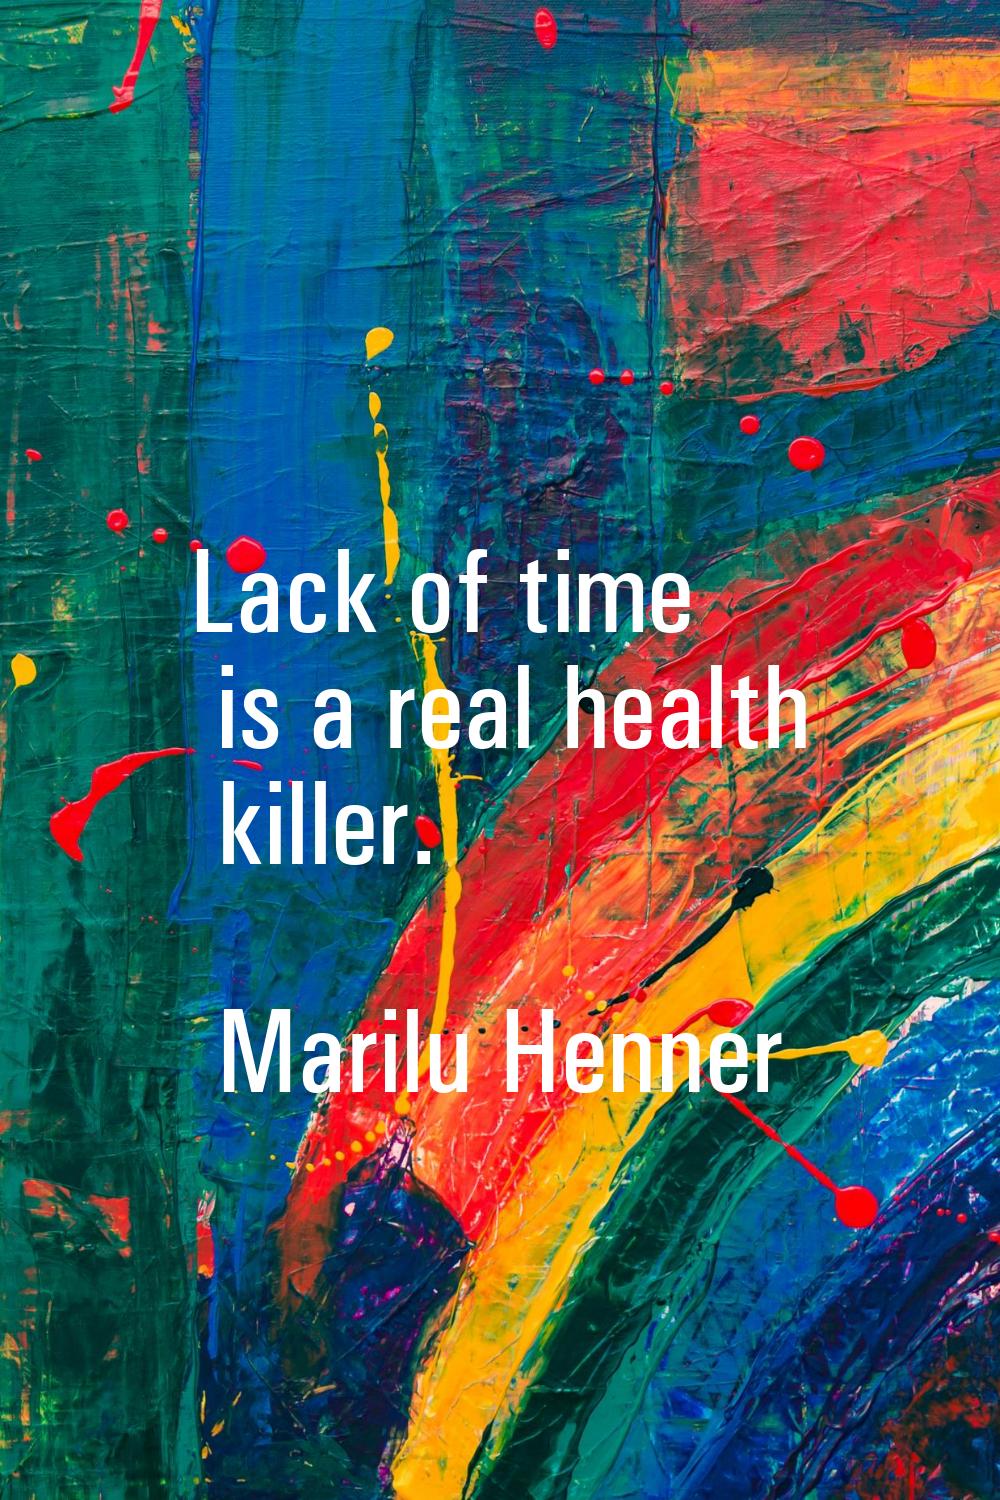 Lack of time is a real health killer.